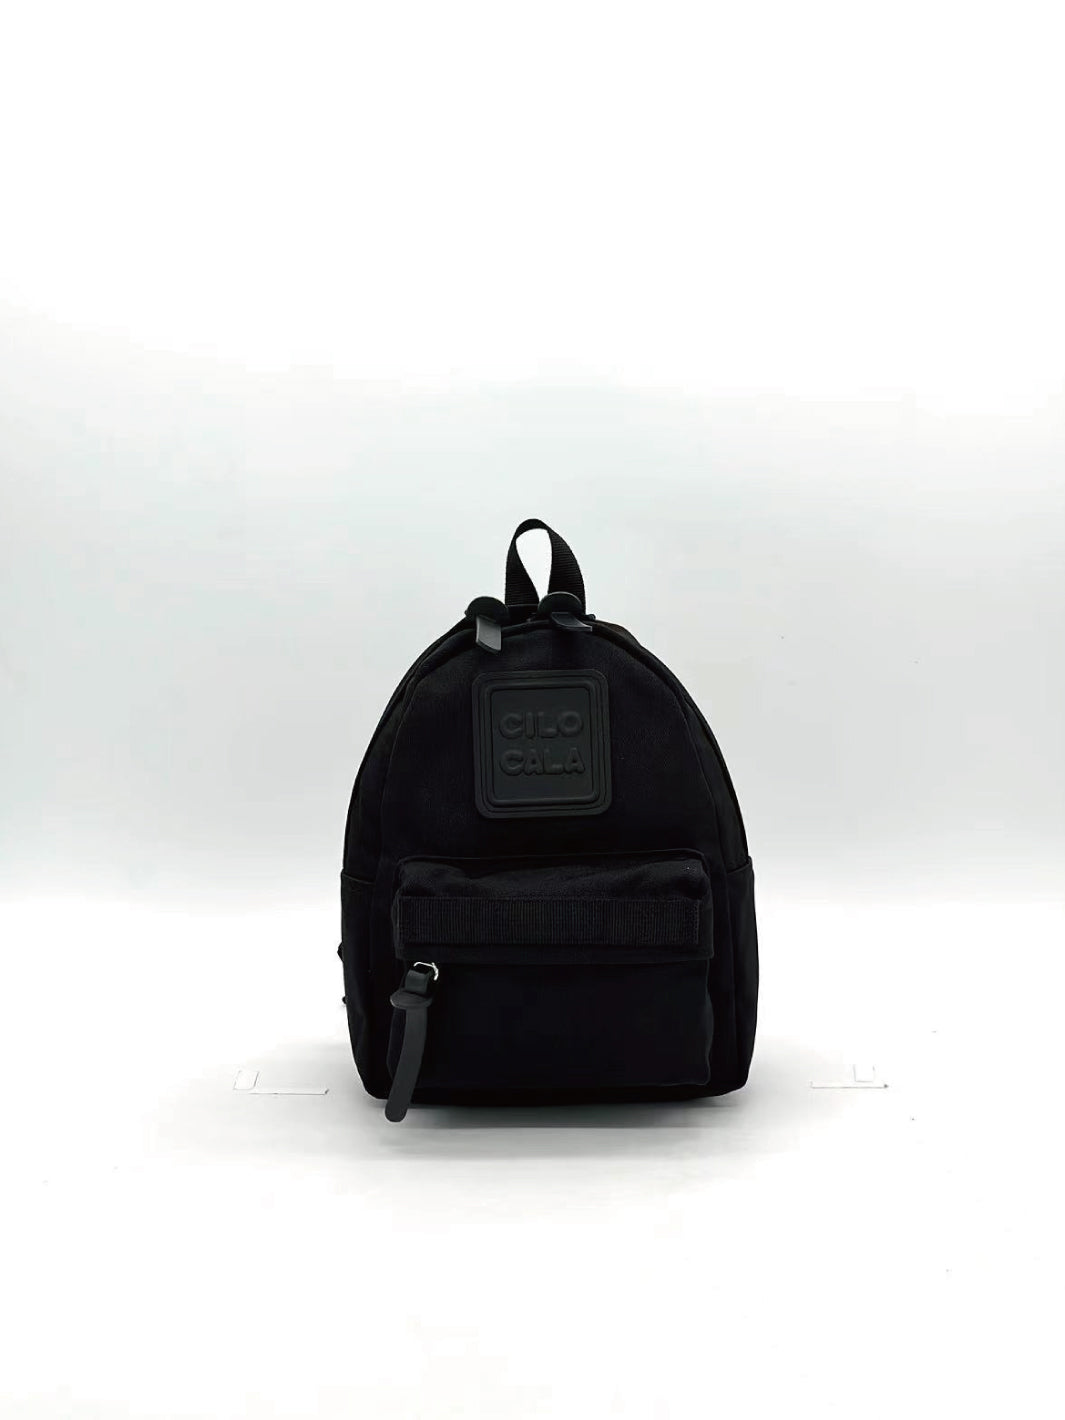 BLACKY BACKPACK (X-SMALL)